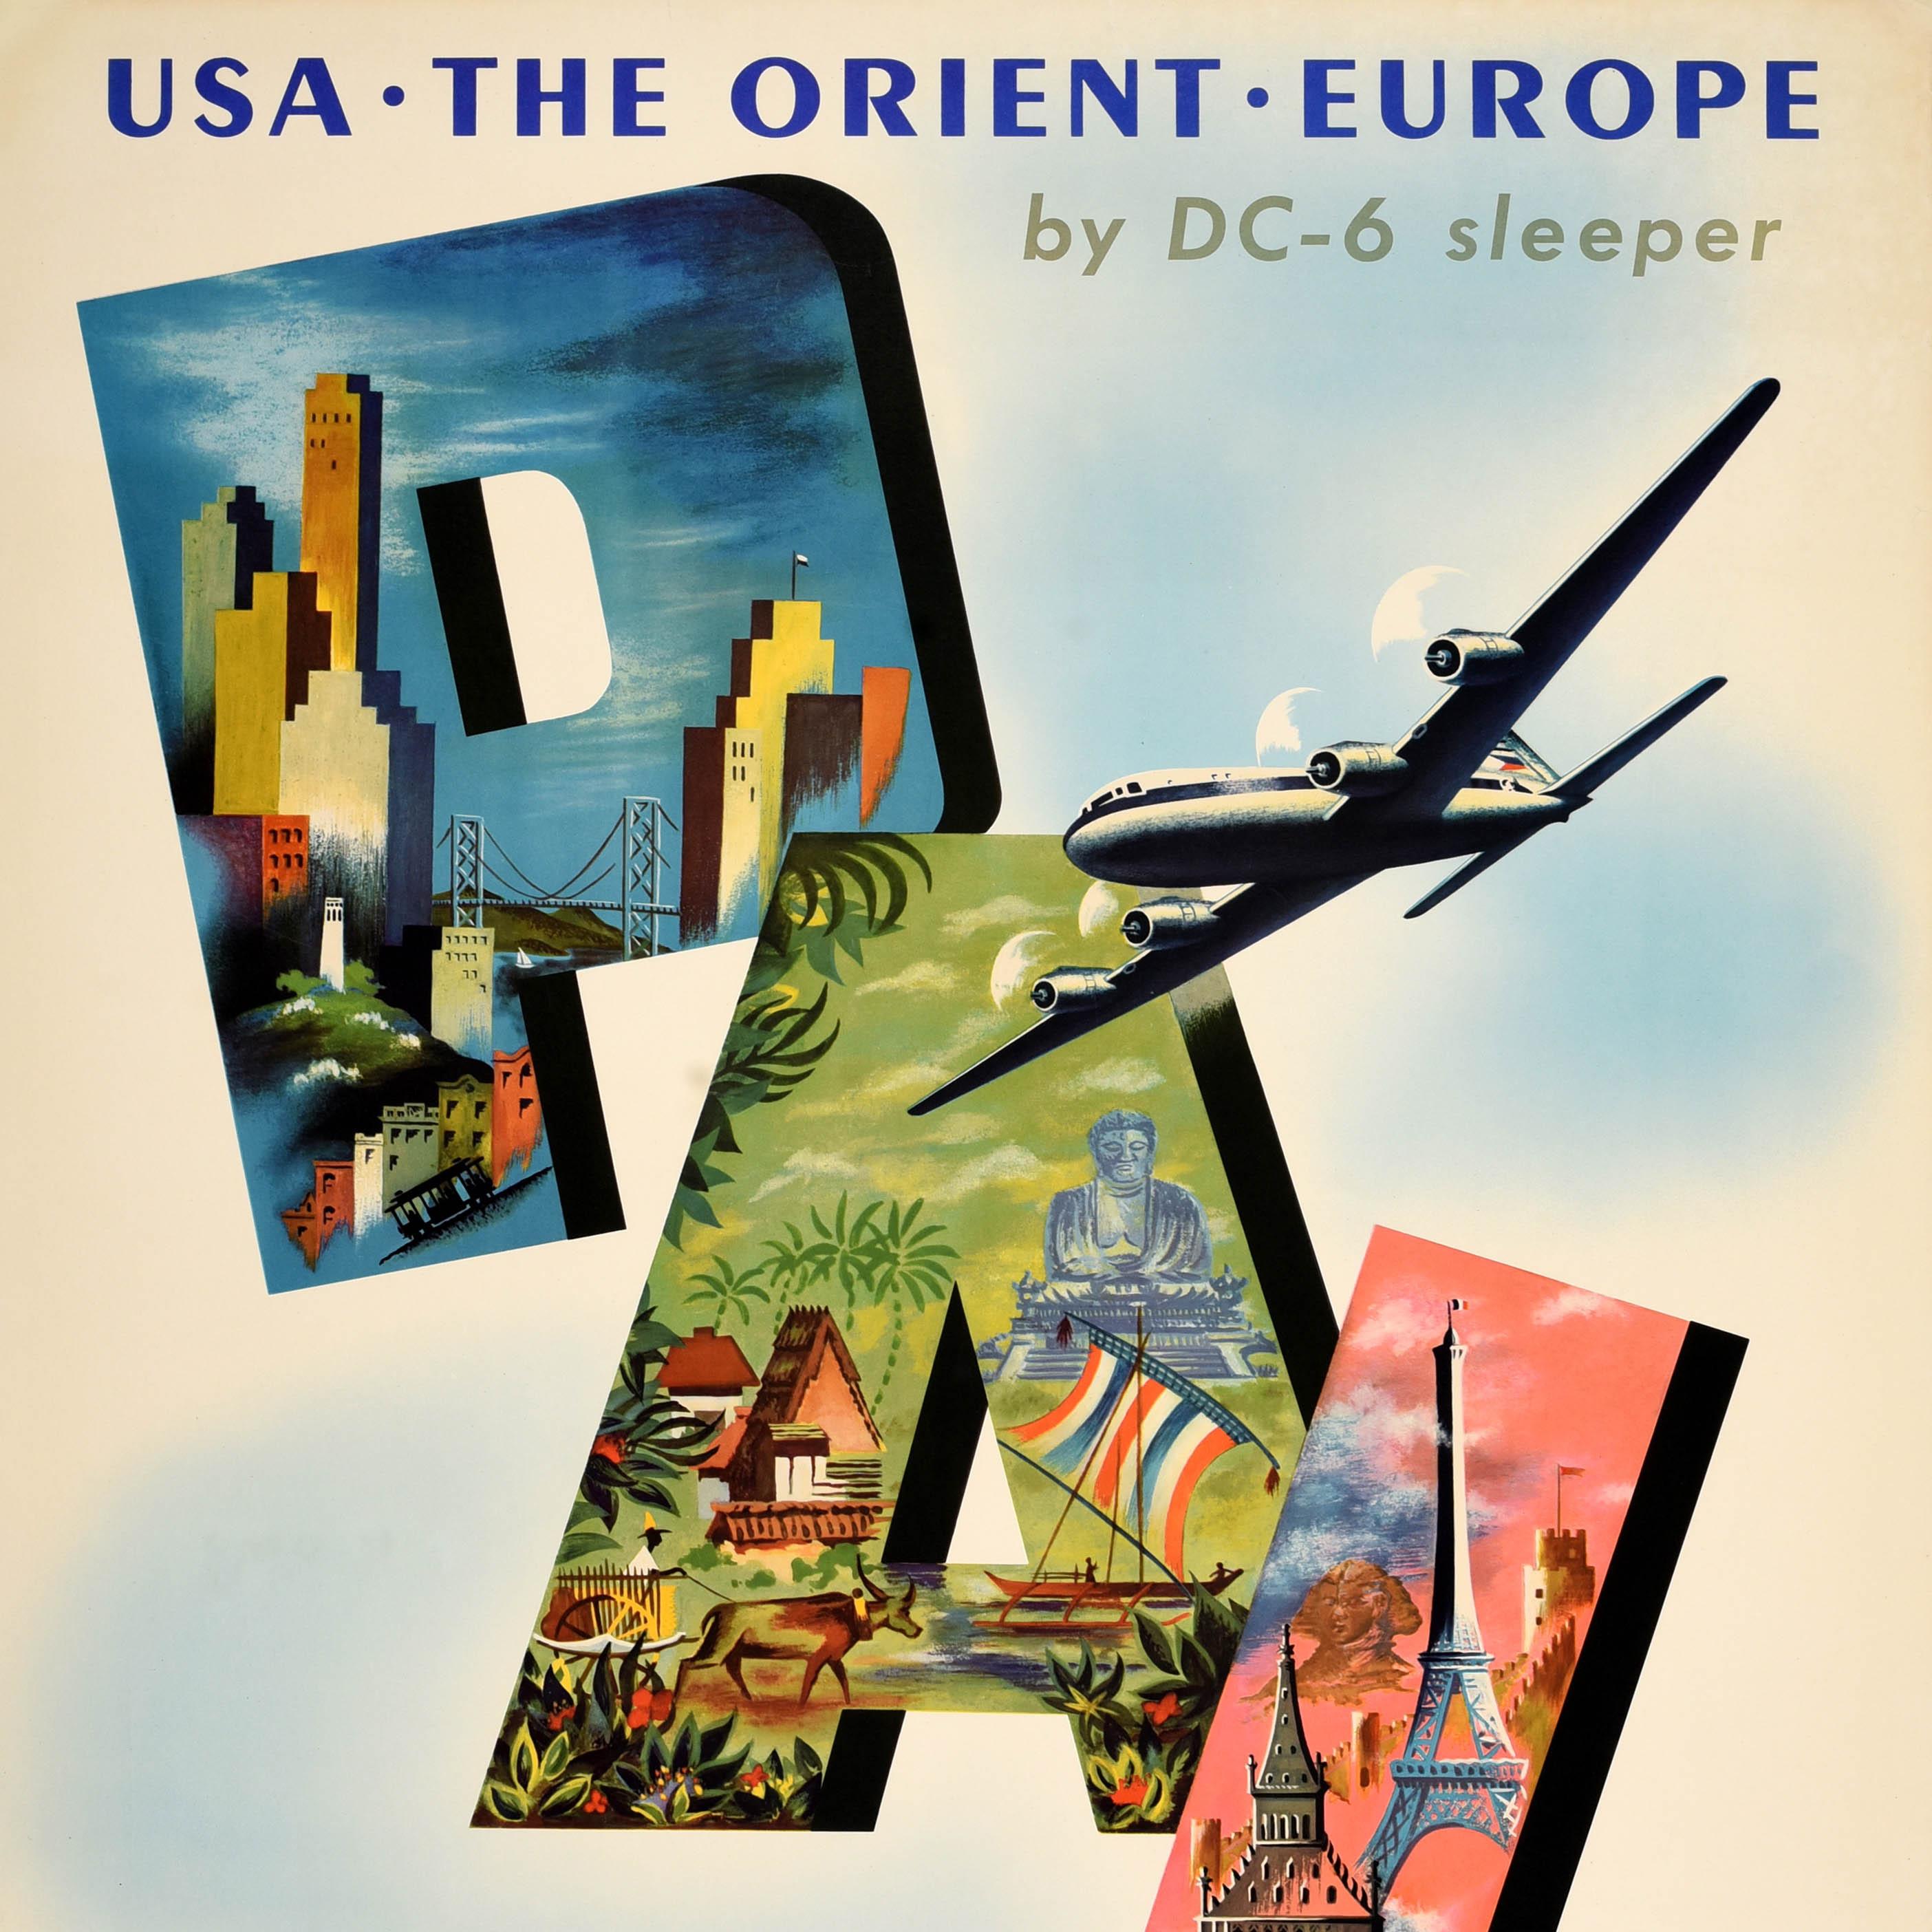 Original vintage travel poster - USA The Orient Europe by DC-6 sleeper PAL Philippine Airlines Speed Comfort Dependability - featuring a great design depicting a passenger plane flying over the bold initials depicting scenes representing the listed